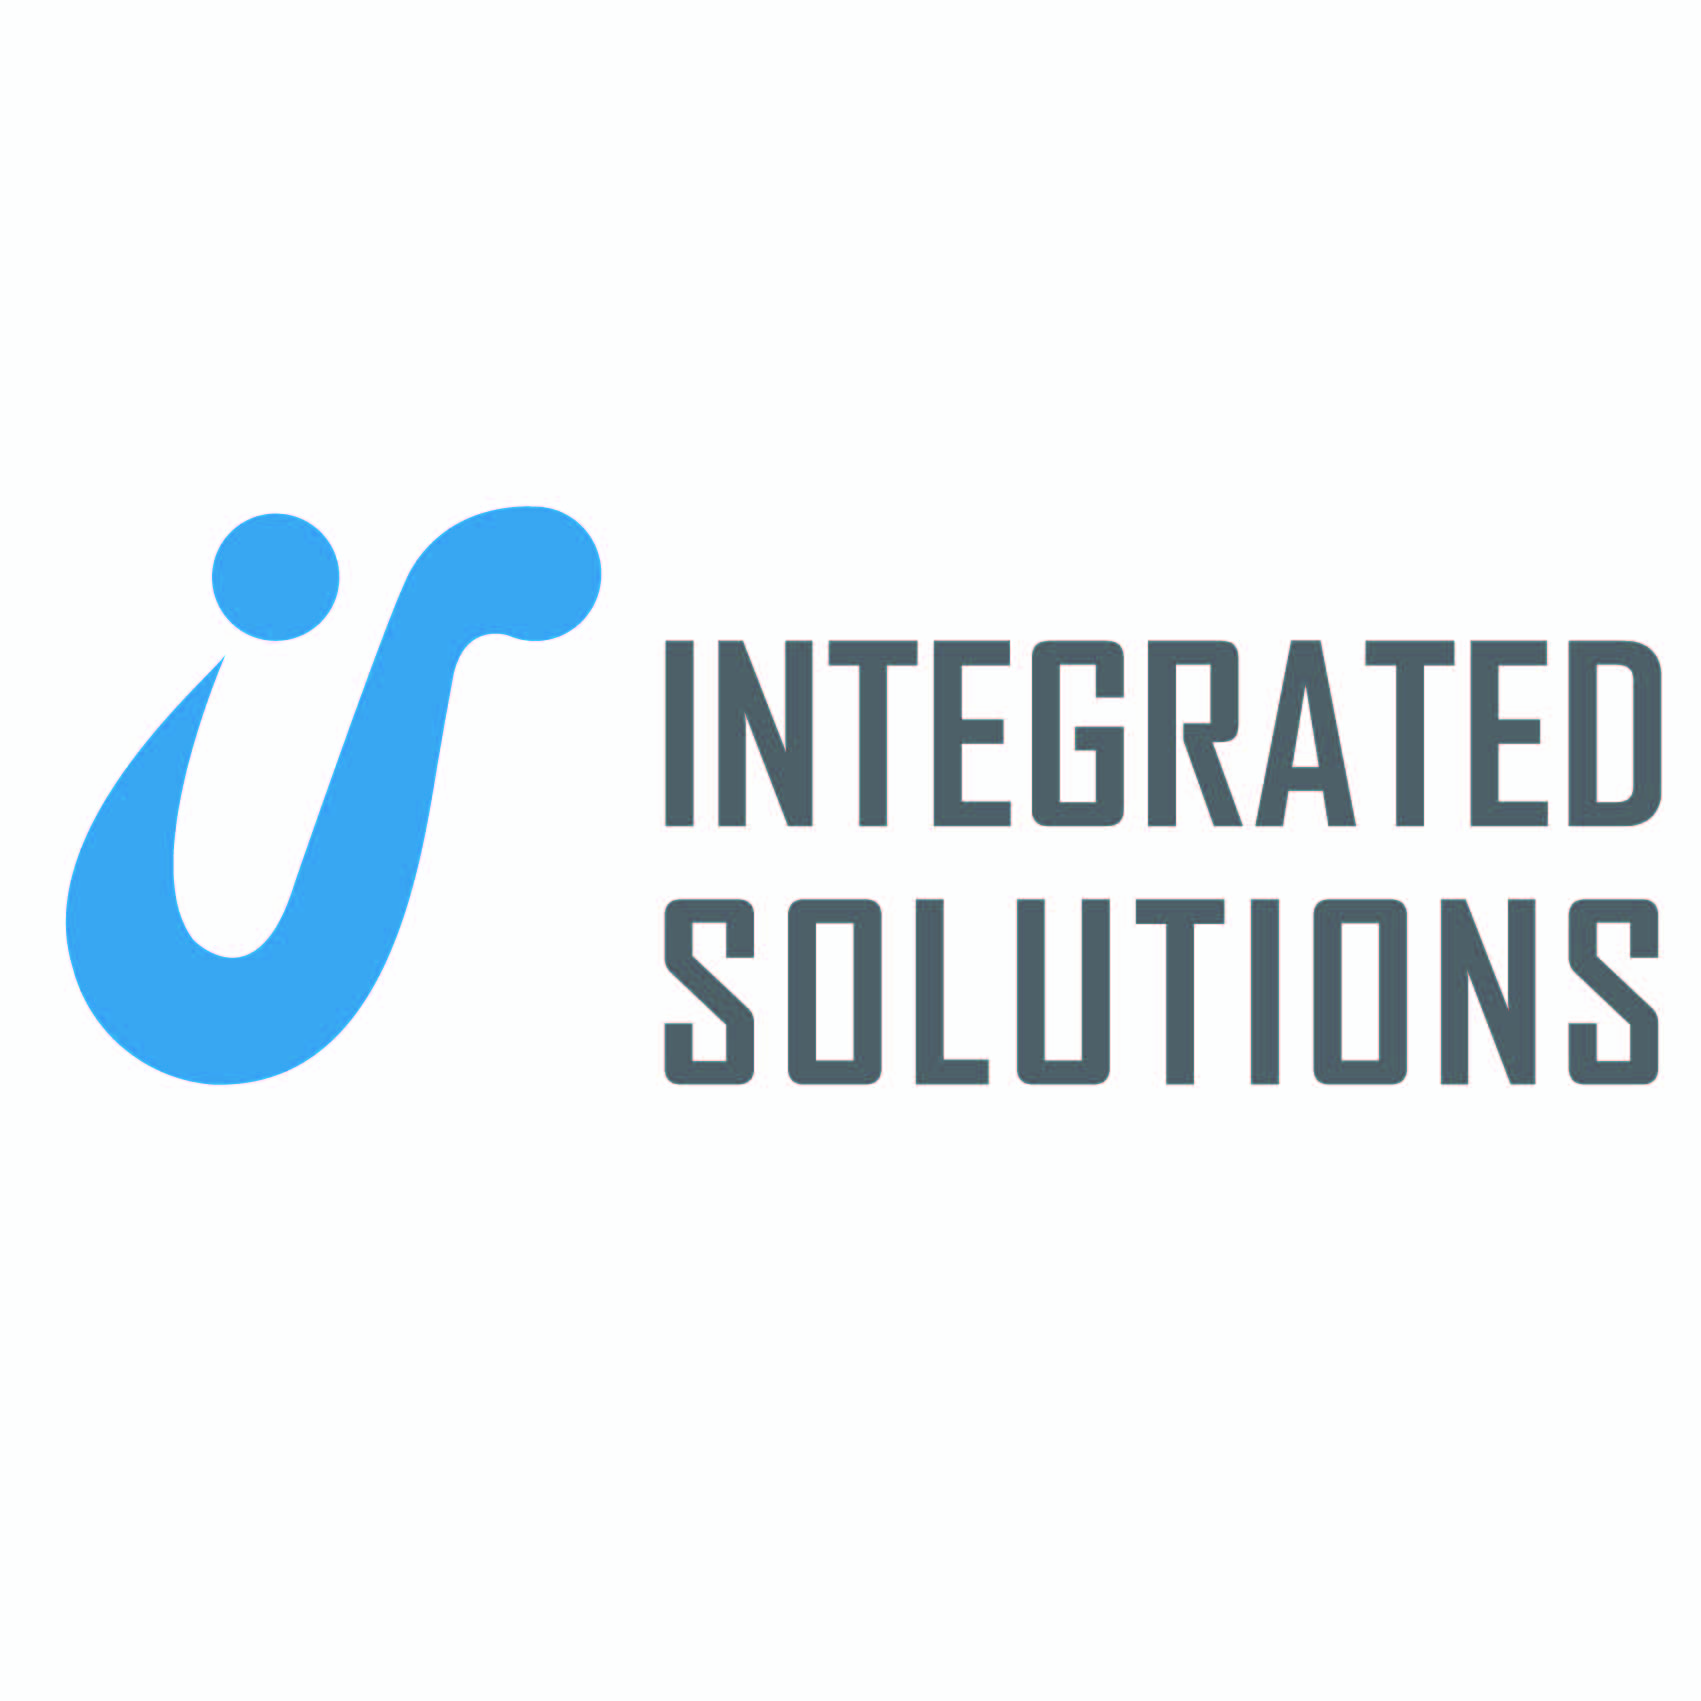 Integrated Solutions Limited